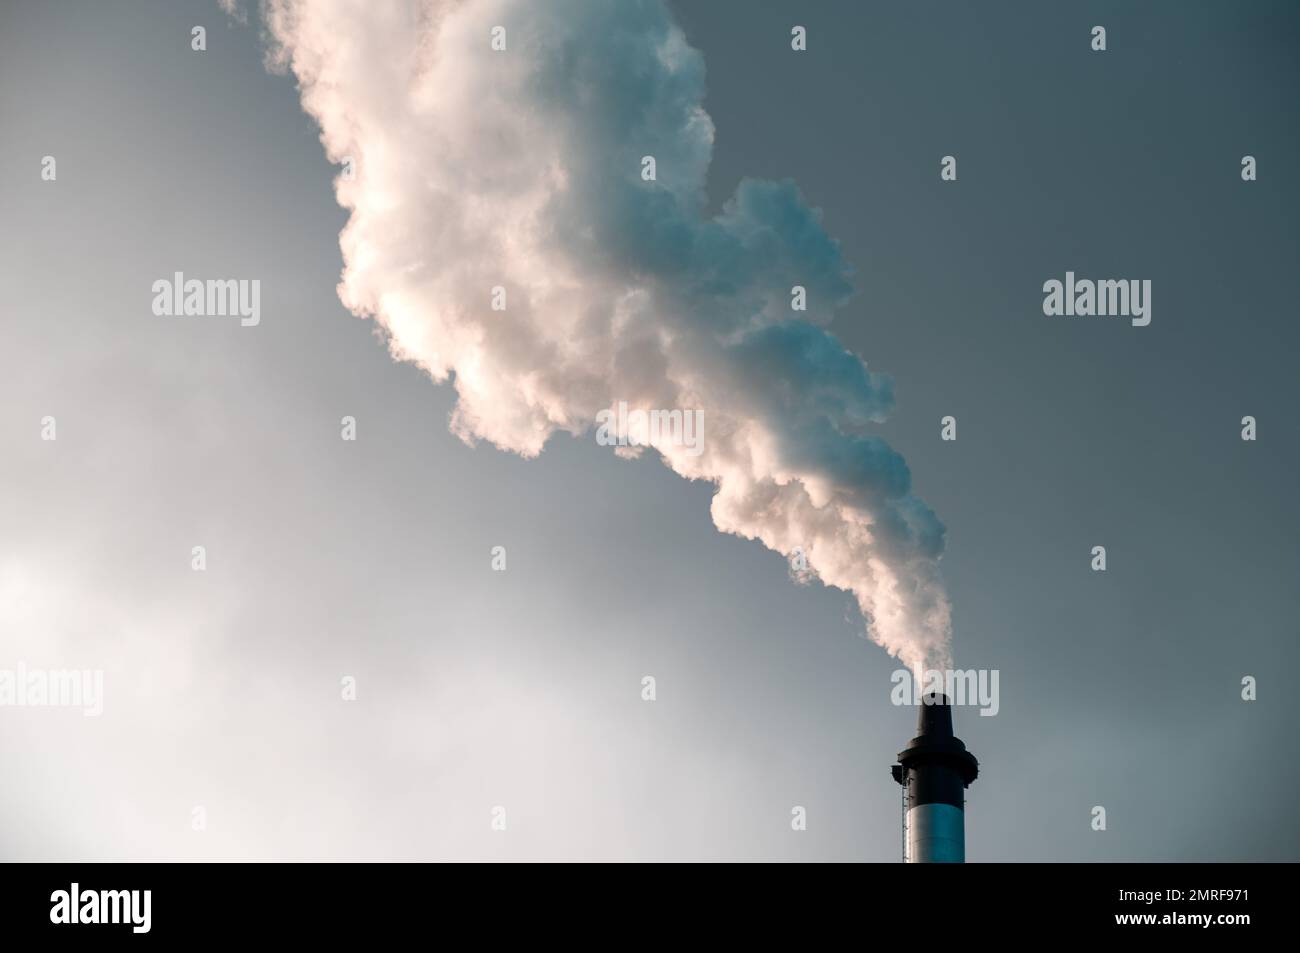 The white smoke coming out of the chimney against the gray daytime sky cloudy sky Stock Photo